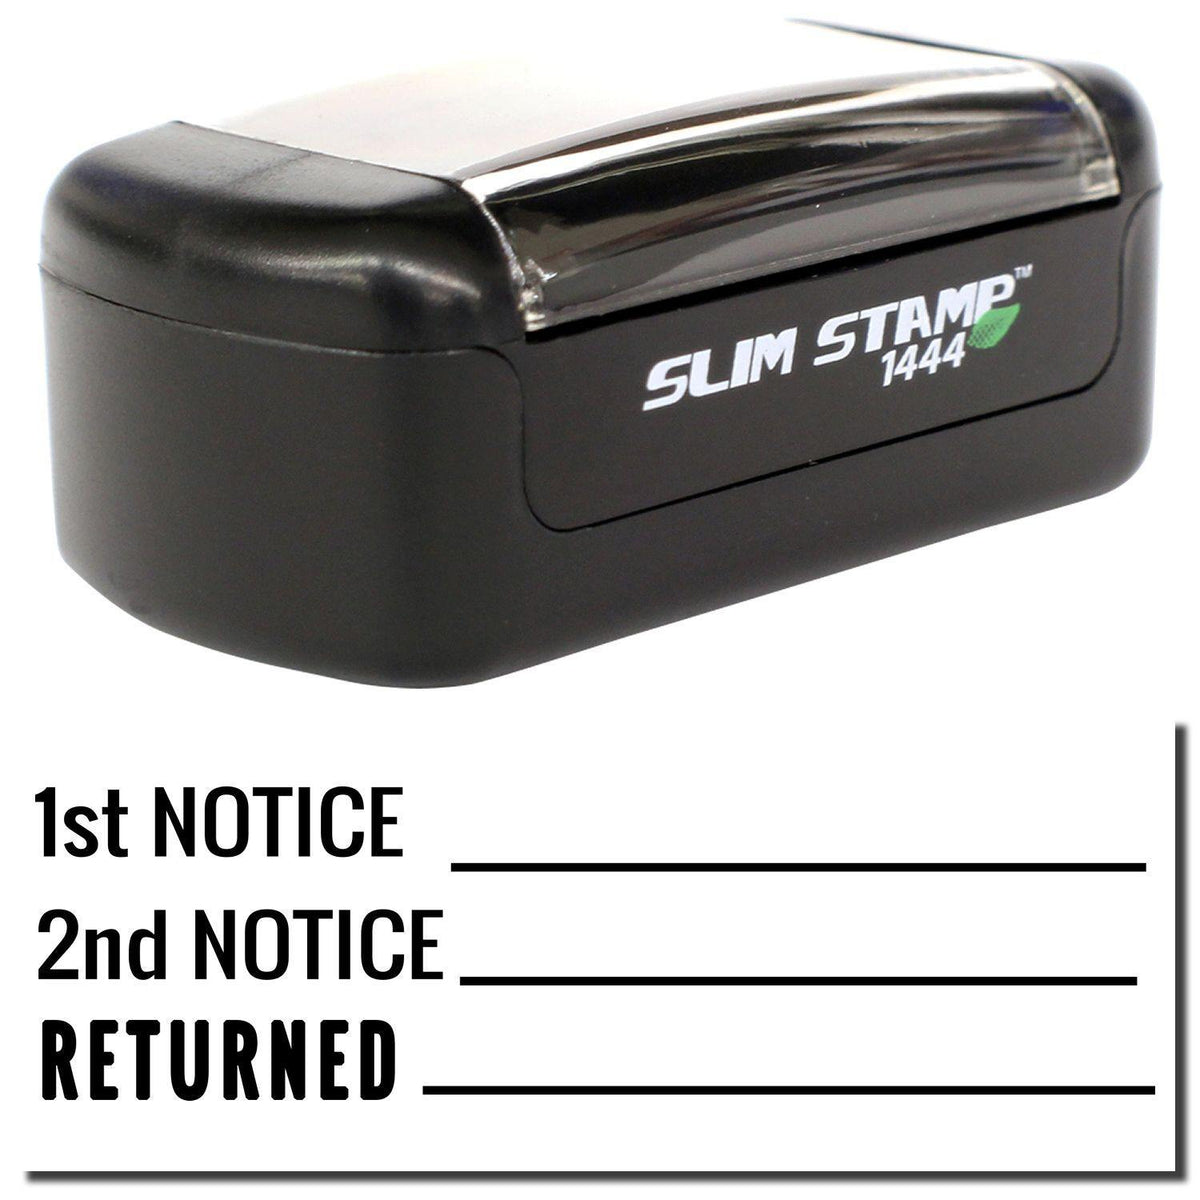 A stock office pre-inked stamp with a stamped image showing how the texts &quot;1st NOTICE&quot;, &quot;2nd NOTICE&quot;, and &quot;RETURNED&quot; with lines are displayed after stamping.